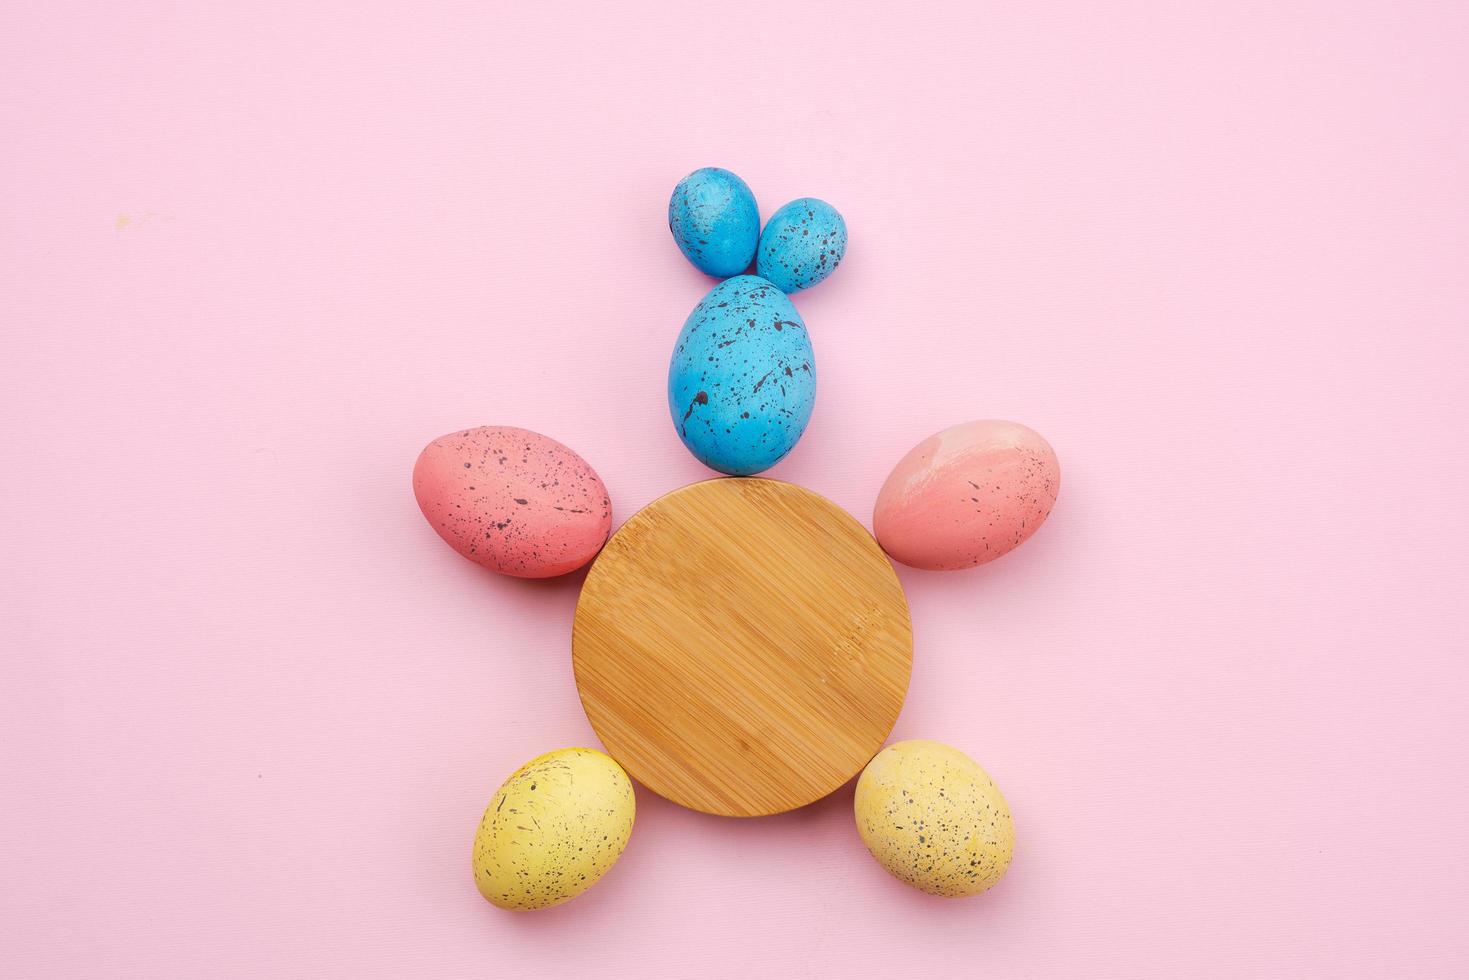 Closeup of a rabbit made of eggs and a wooden circle on the table. Easter concept photo